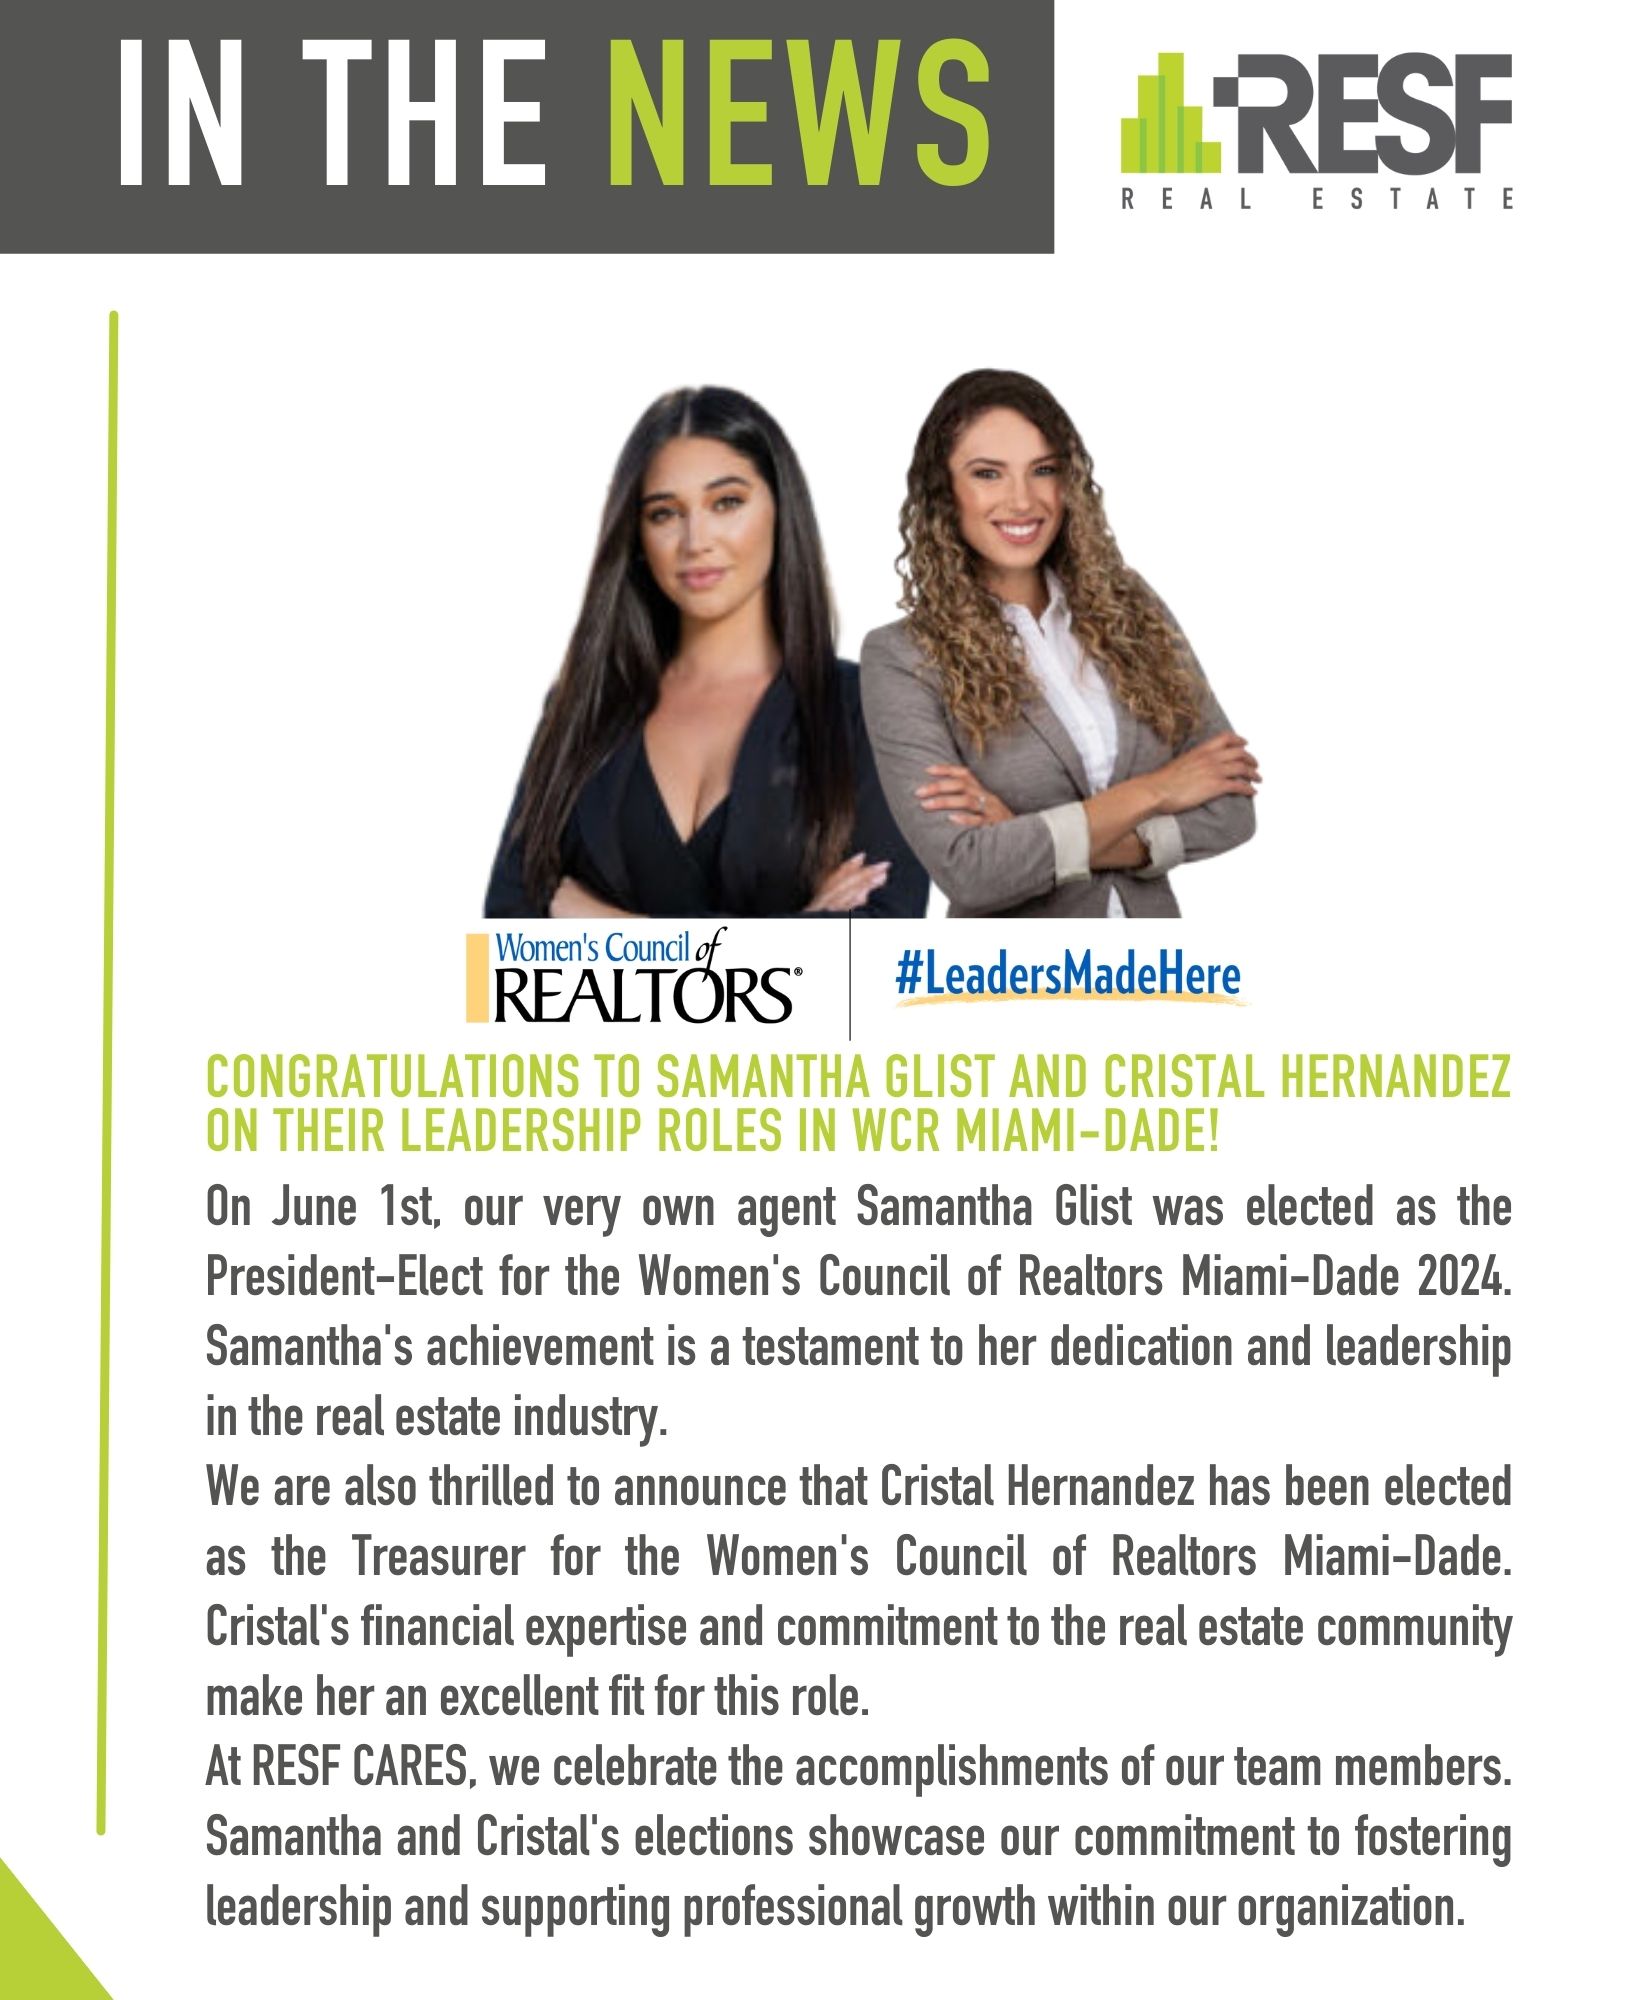 Congratulations to Samantha Glist and Cristal Hernandez on Their Leadership Roles in WCR Miami-Dade!